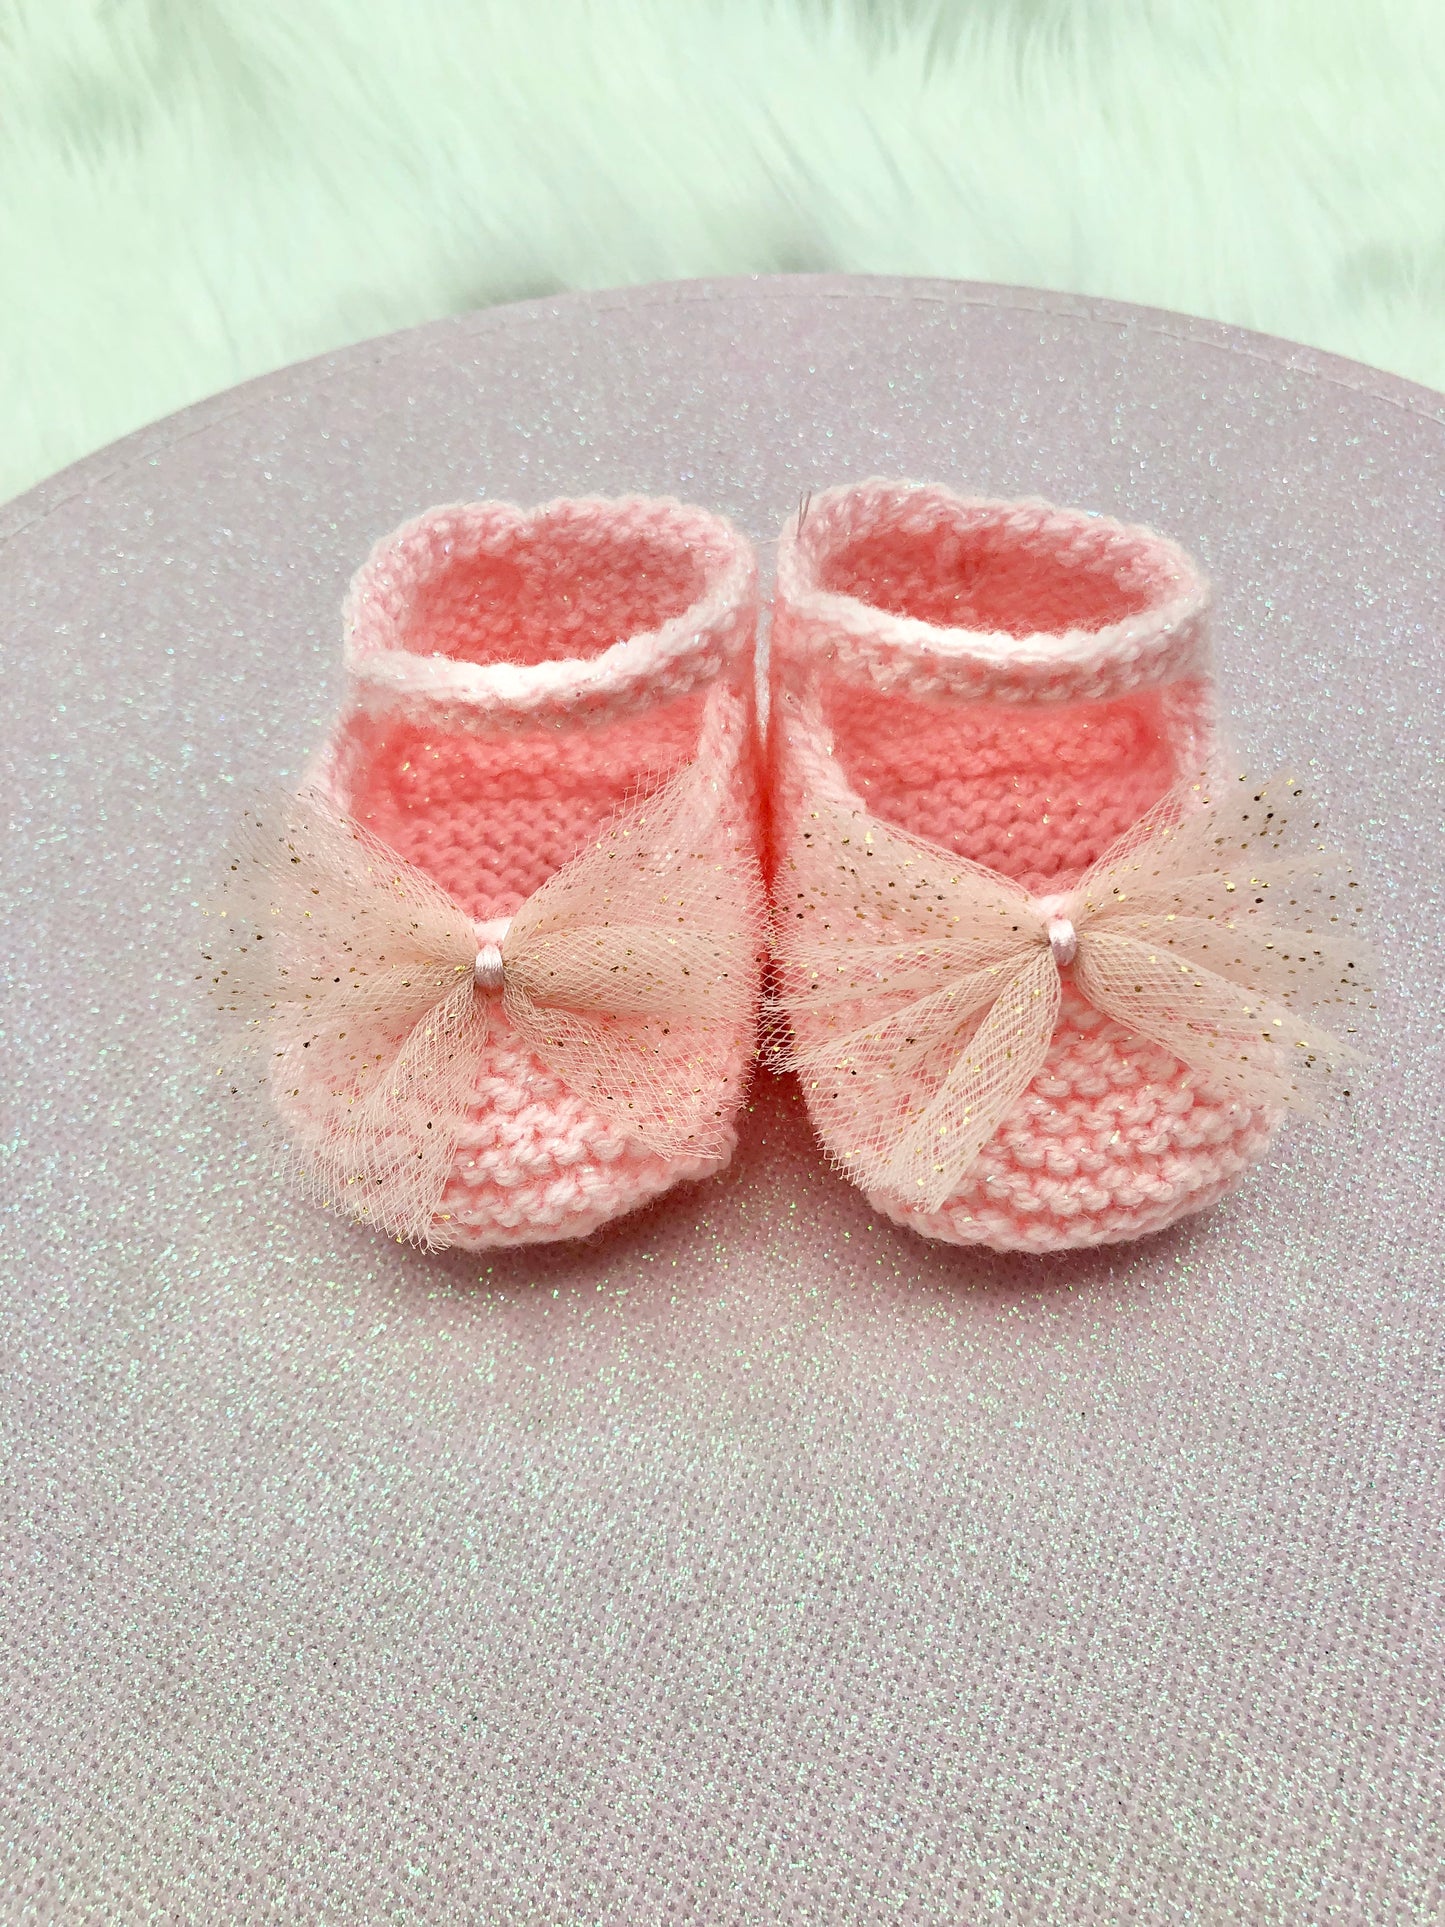 Chaussons/Ballerines roses au tricot